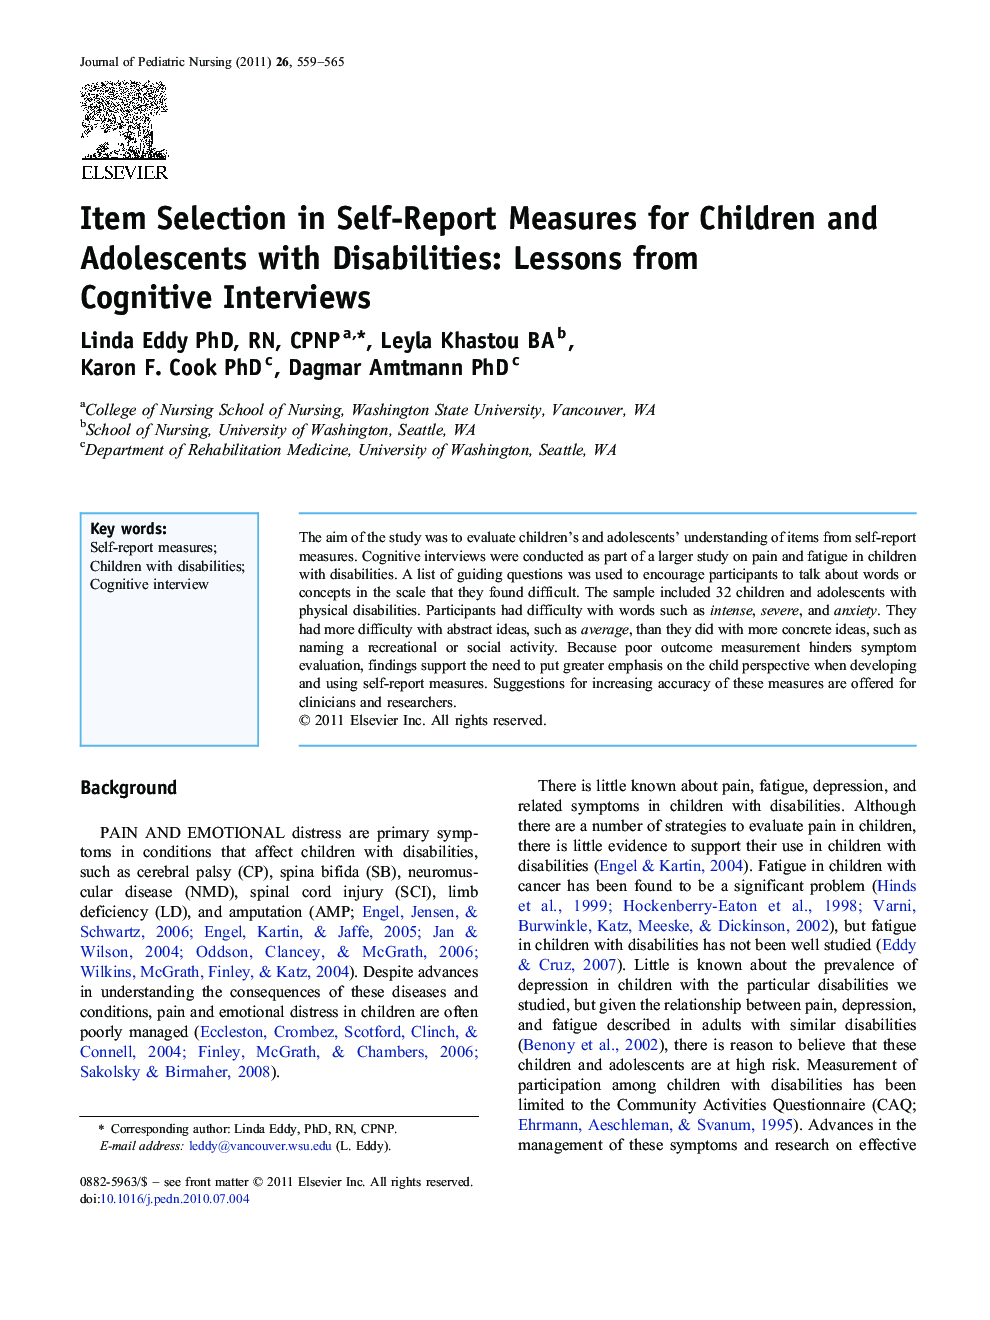 Item Selection in Self-Report Measures for Children and Adolescents with Disabilities: Lessons from Cognitive Interviews